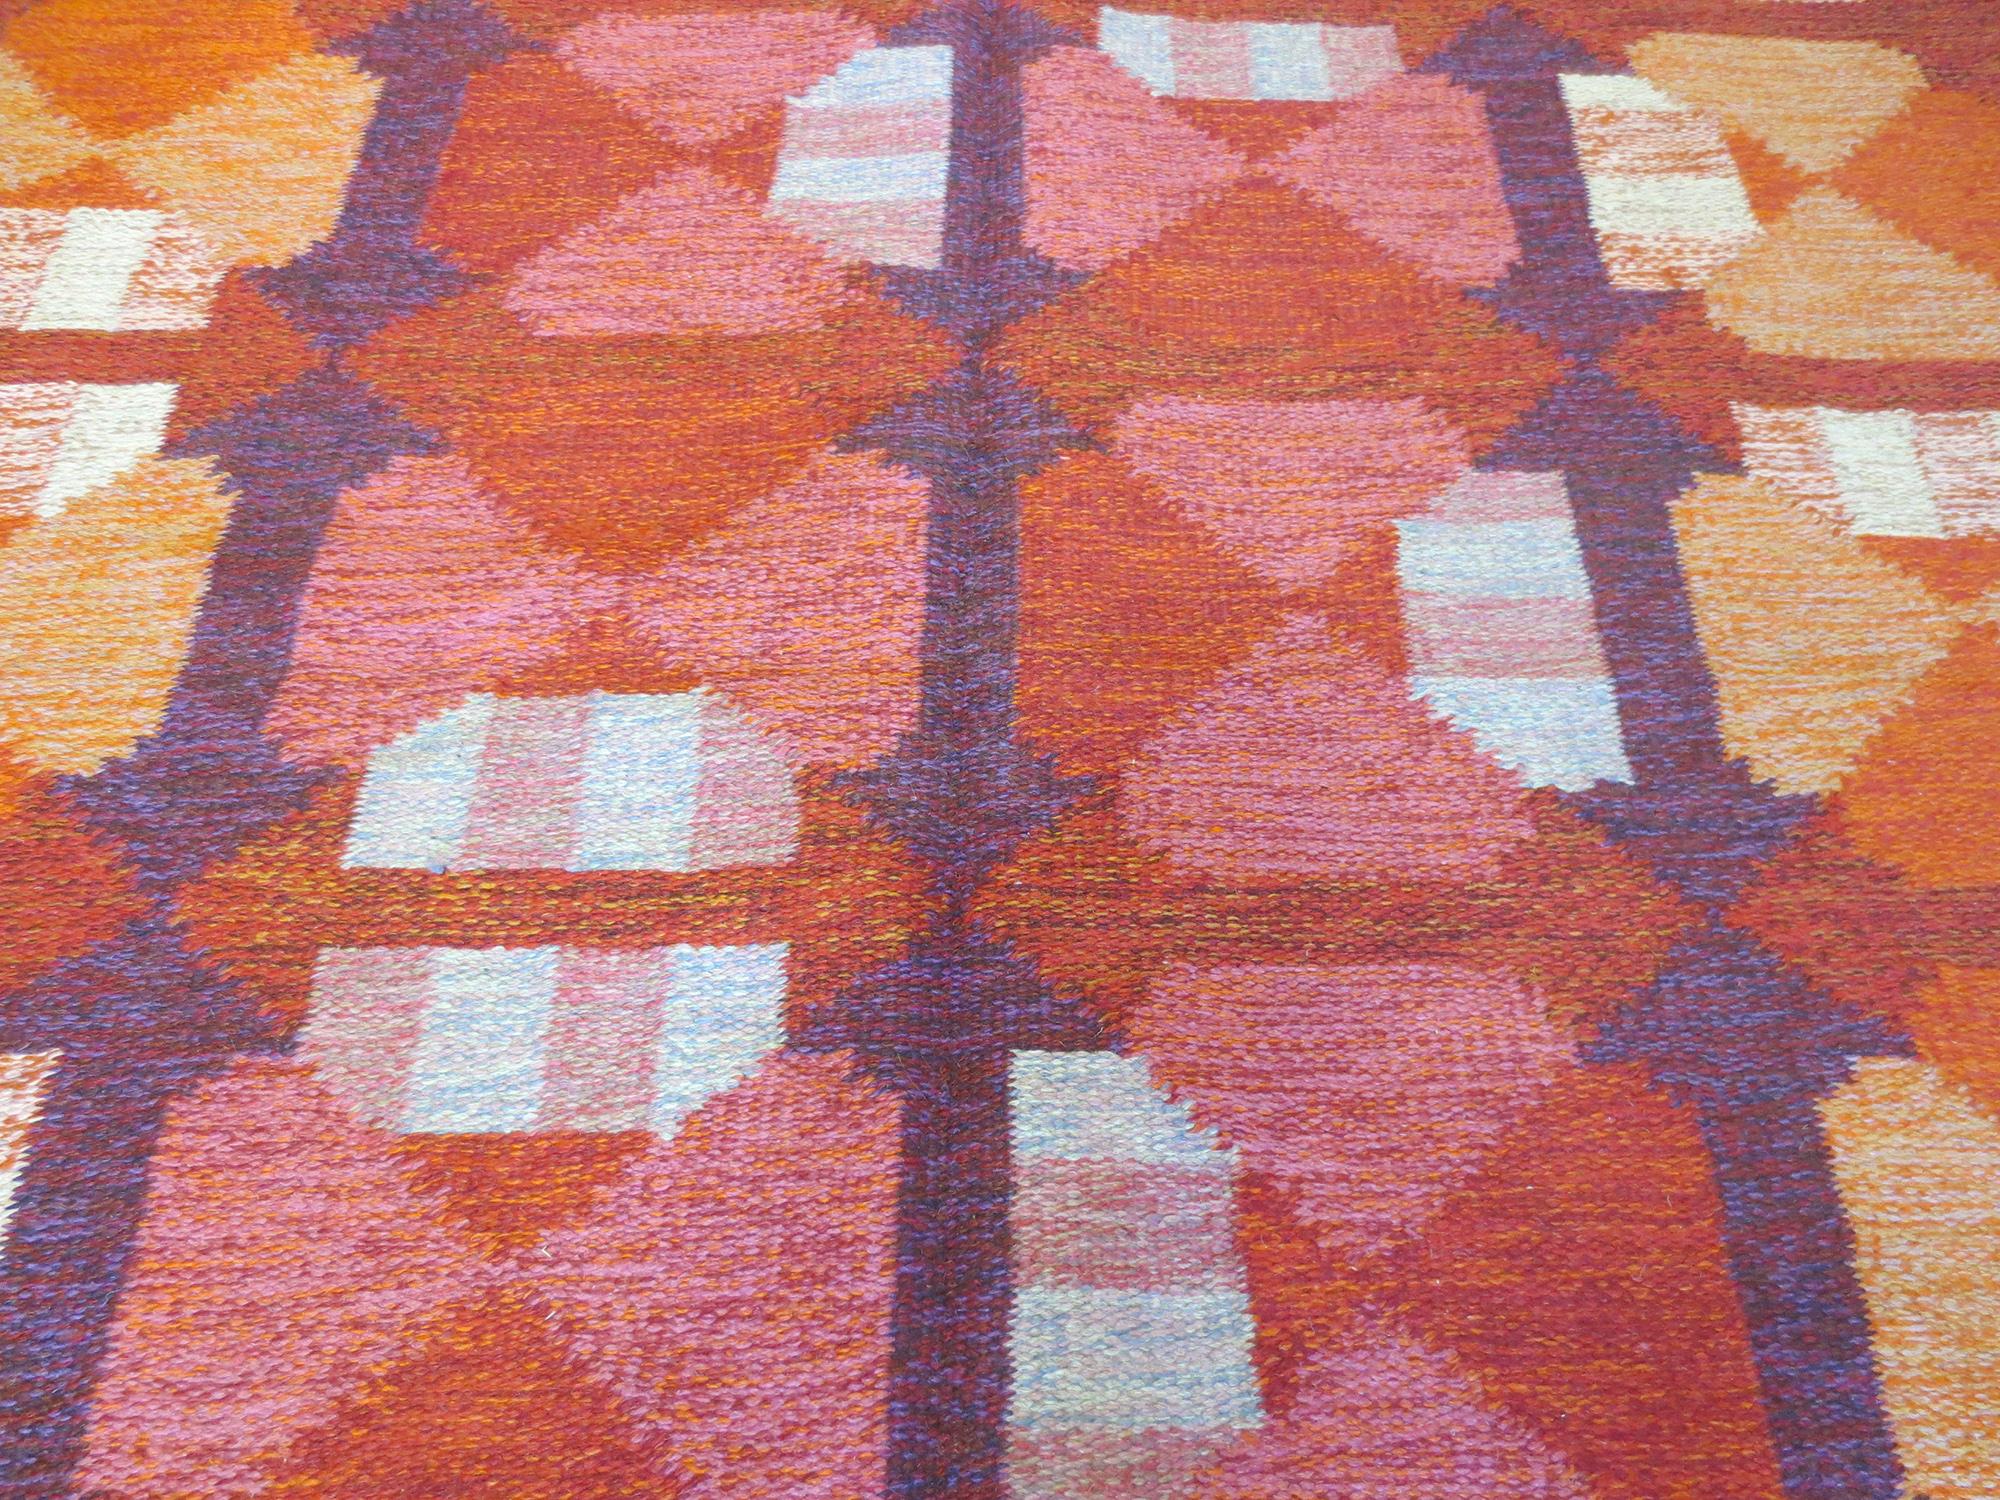 This is a Finnish vintage rug signed by textile artist, Alestasalon Mottokutomo, from the mid-20th century and in excellent condition. It is handwoven with shades of bold and vivid reds, oranges, pinks, and purples in a beautiful abstract geometric